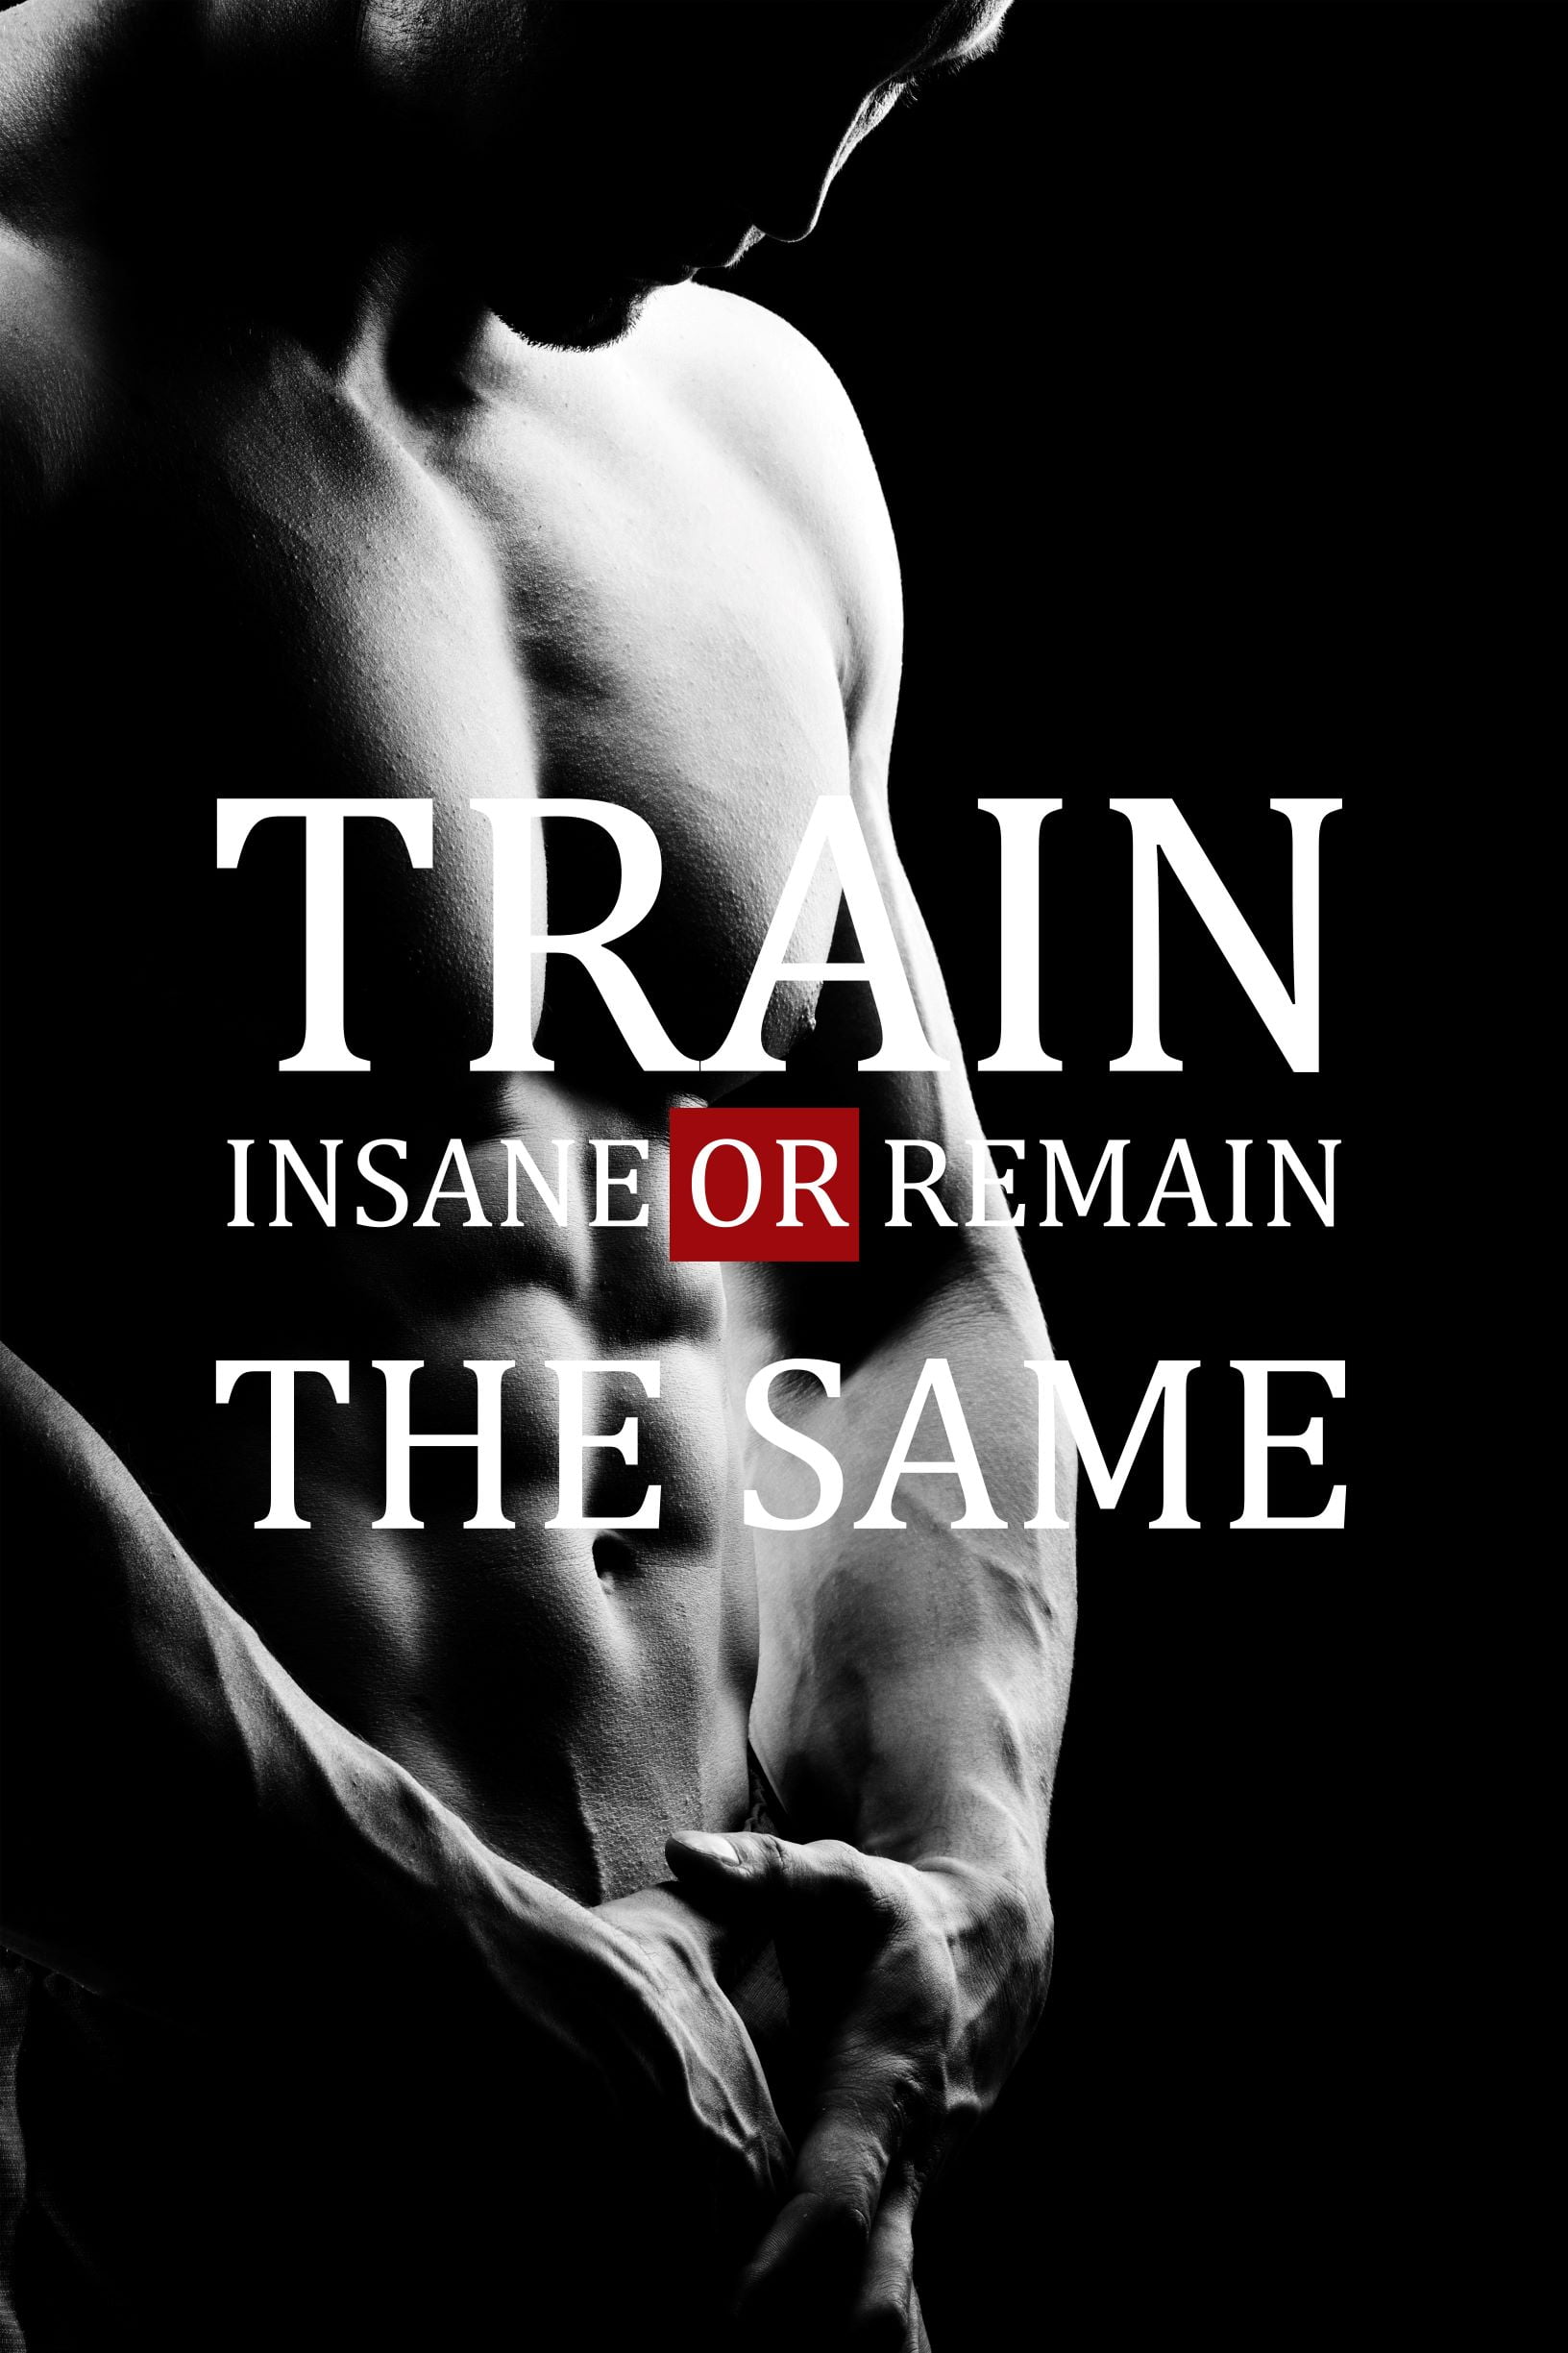 P Bodybuilding INSPIRATIONAL/MOTIVATIONAL GYM PRINT PICTURE POSTER 